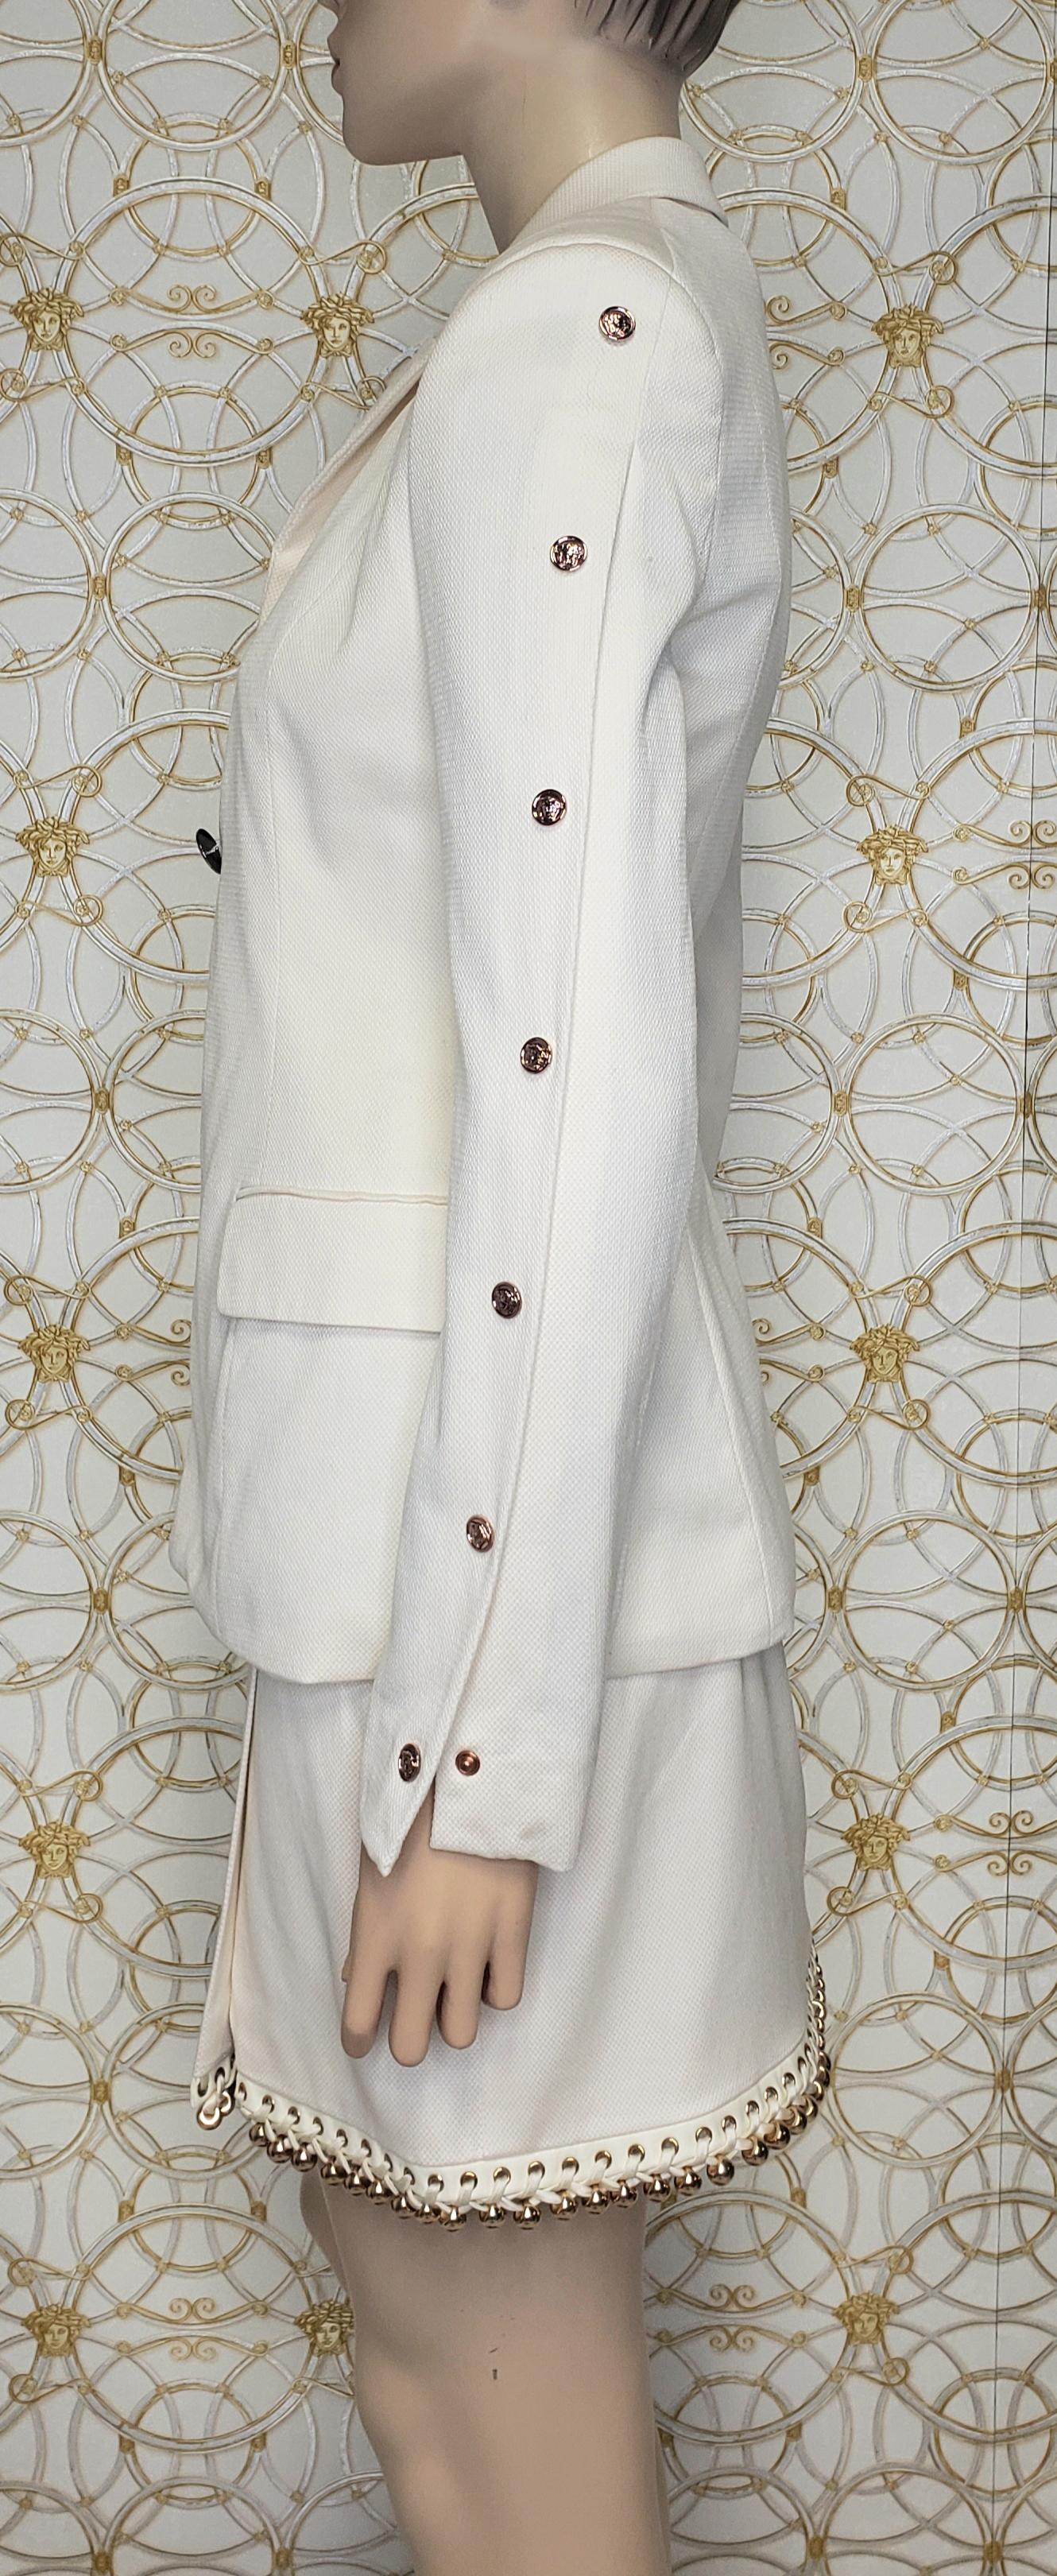 Women's Resort 2013 look #1 NEW VERSACE OFF WHITE COTTON SKIRT SUIT For Sale